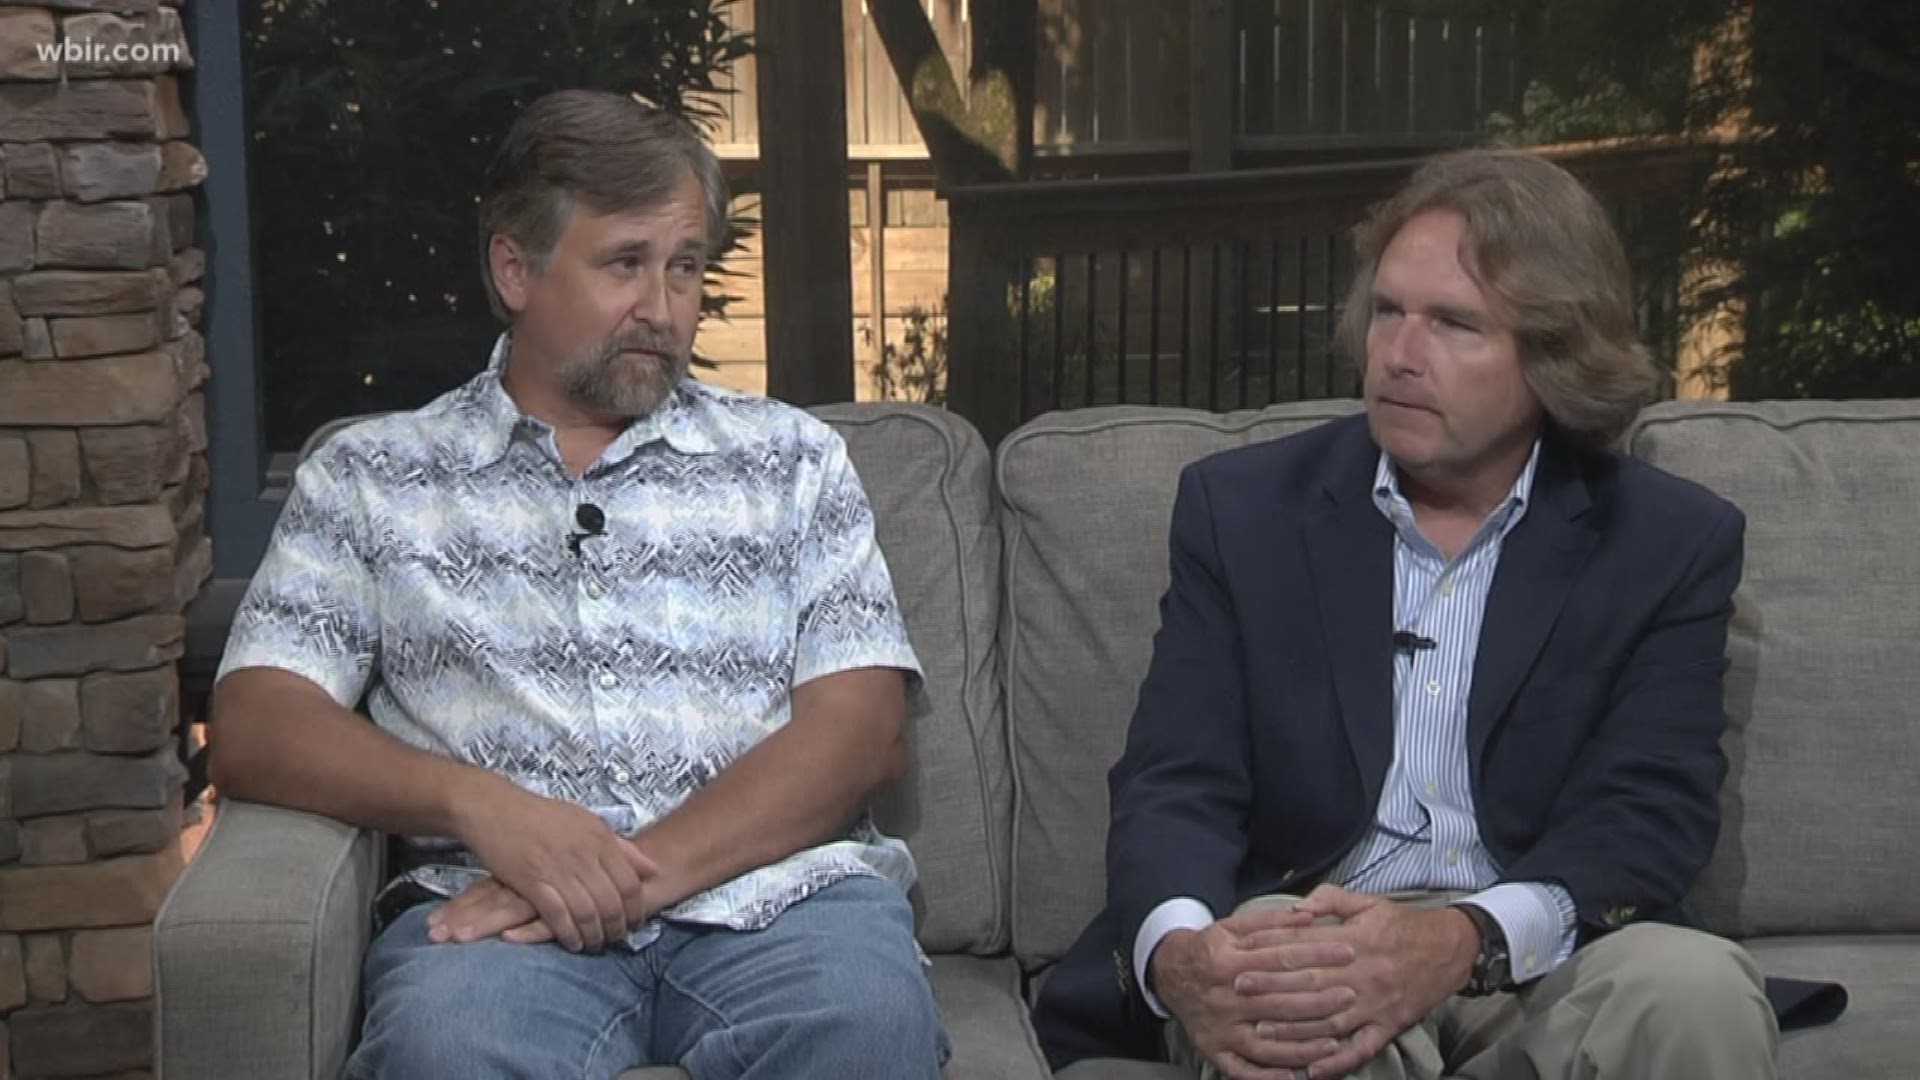 Music fans Wayne Bledsoe and John North share their thoughts on the upcoming movie 'Rocketman' which opens May 31. May 29, 2019-4pm.